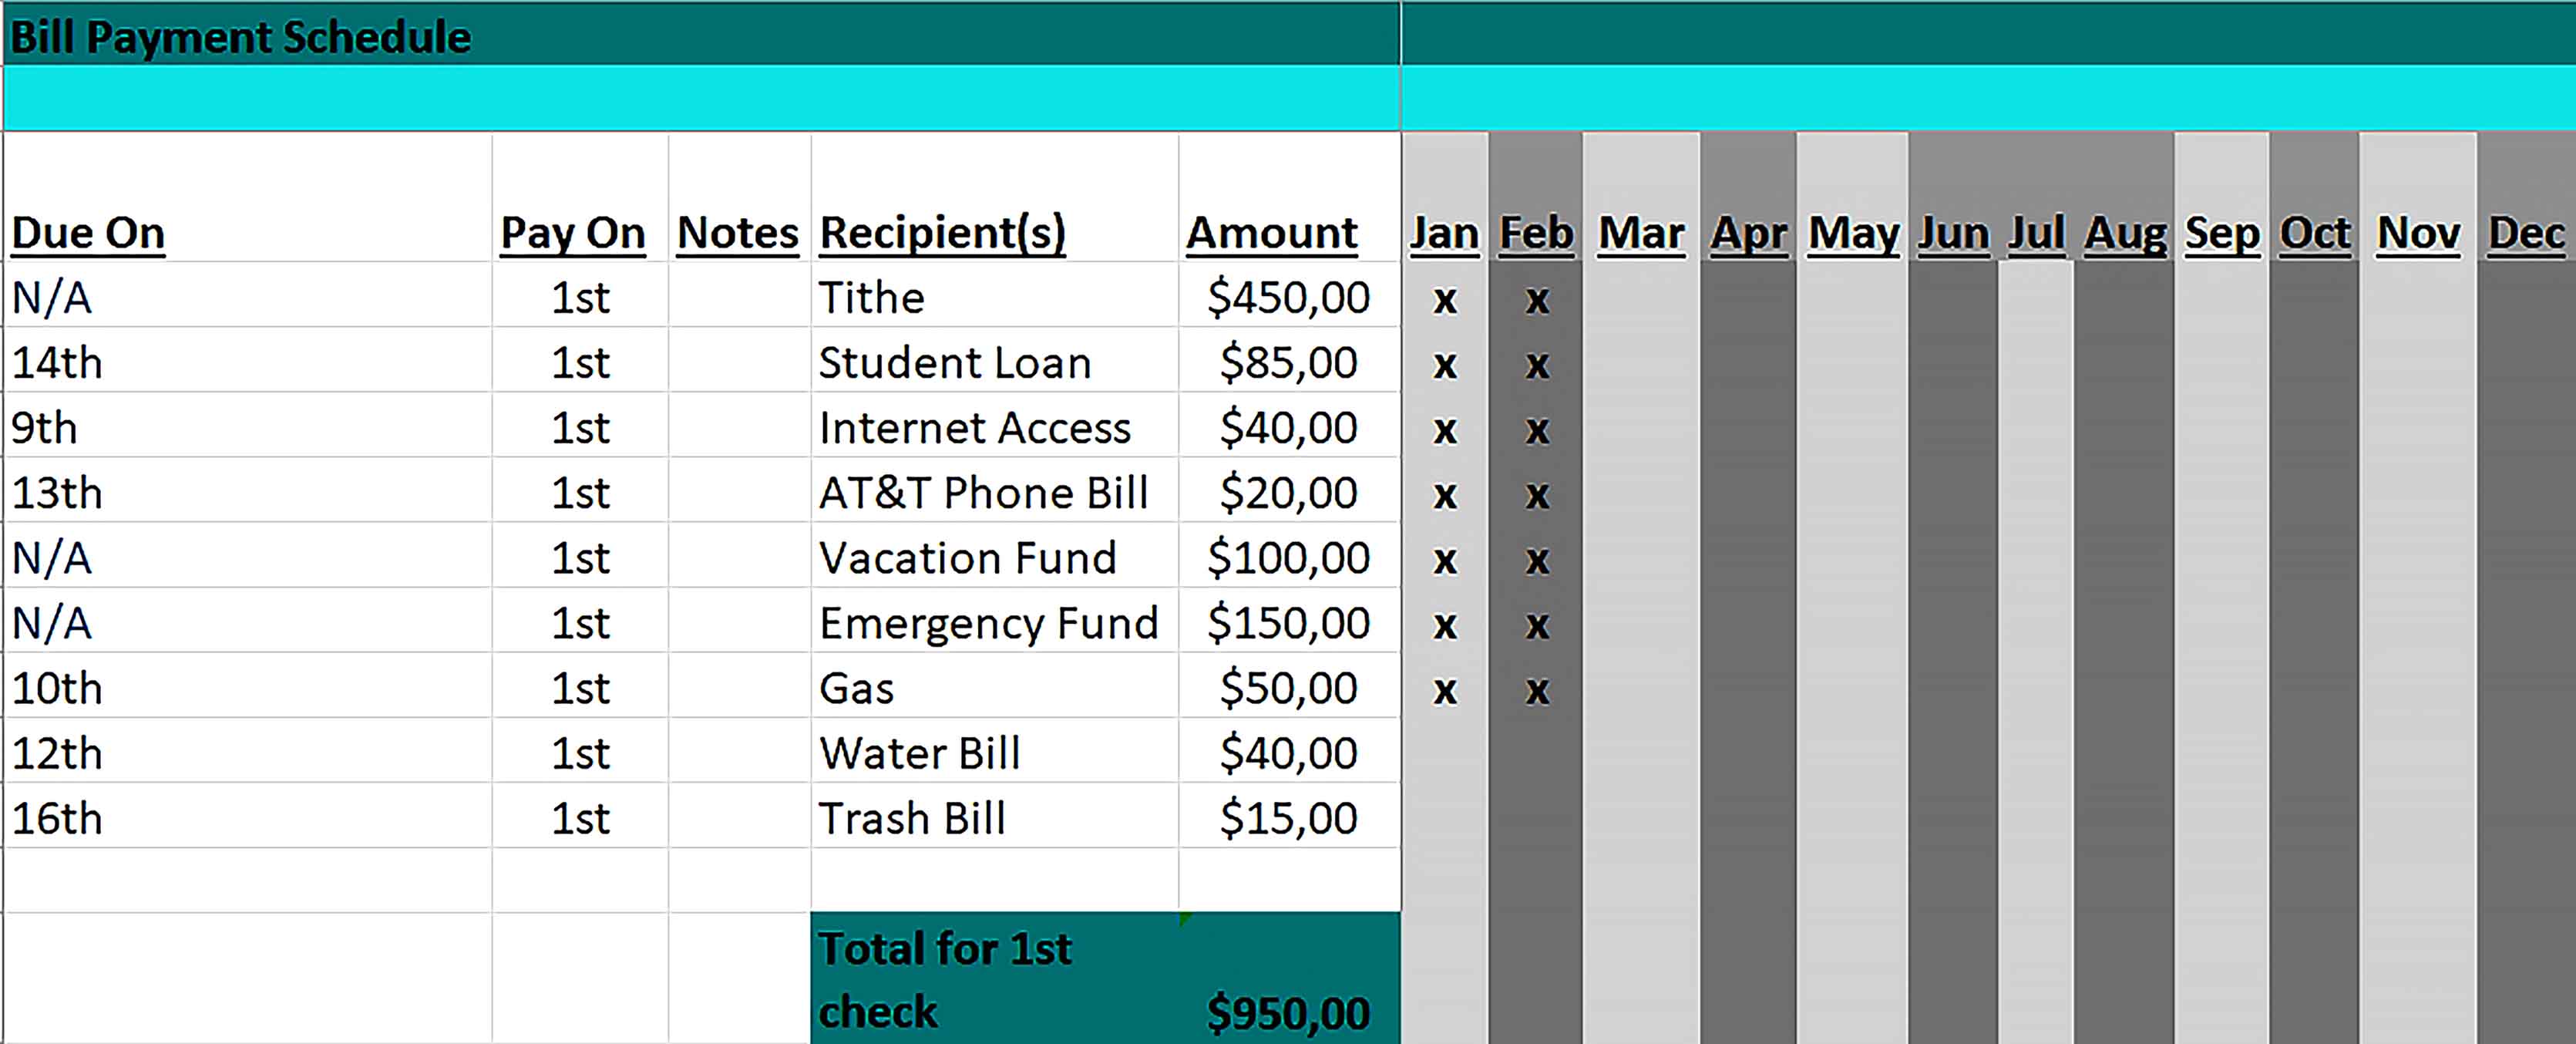 Template Bill Payment Schedule Excel Format Sample